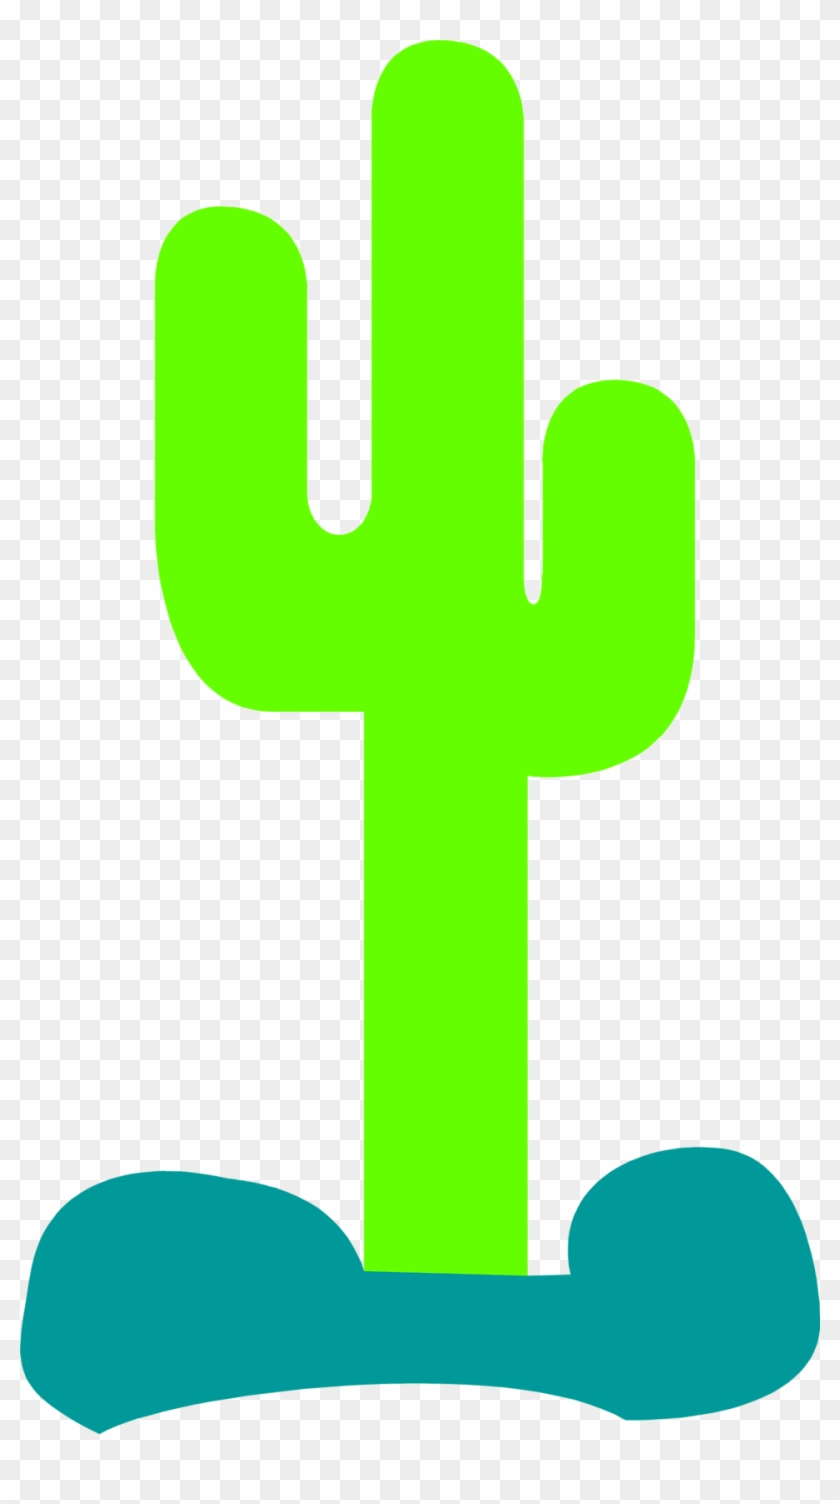 Cactus Silhouette Clip Art - Green Cactus Silhouette - Png Download